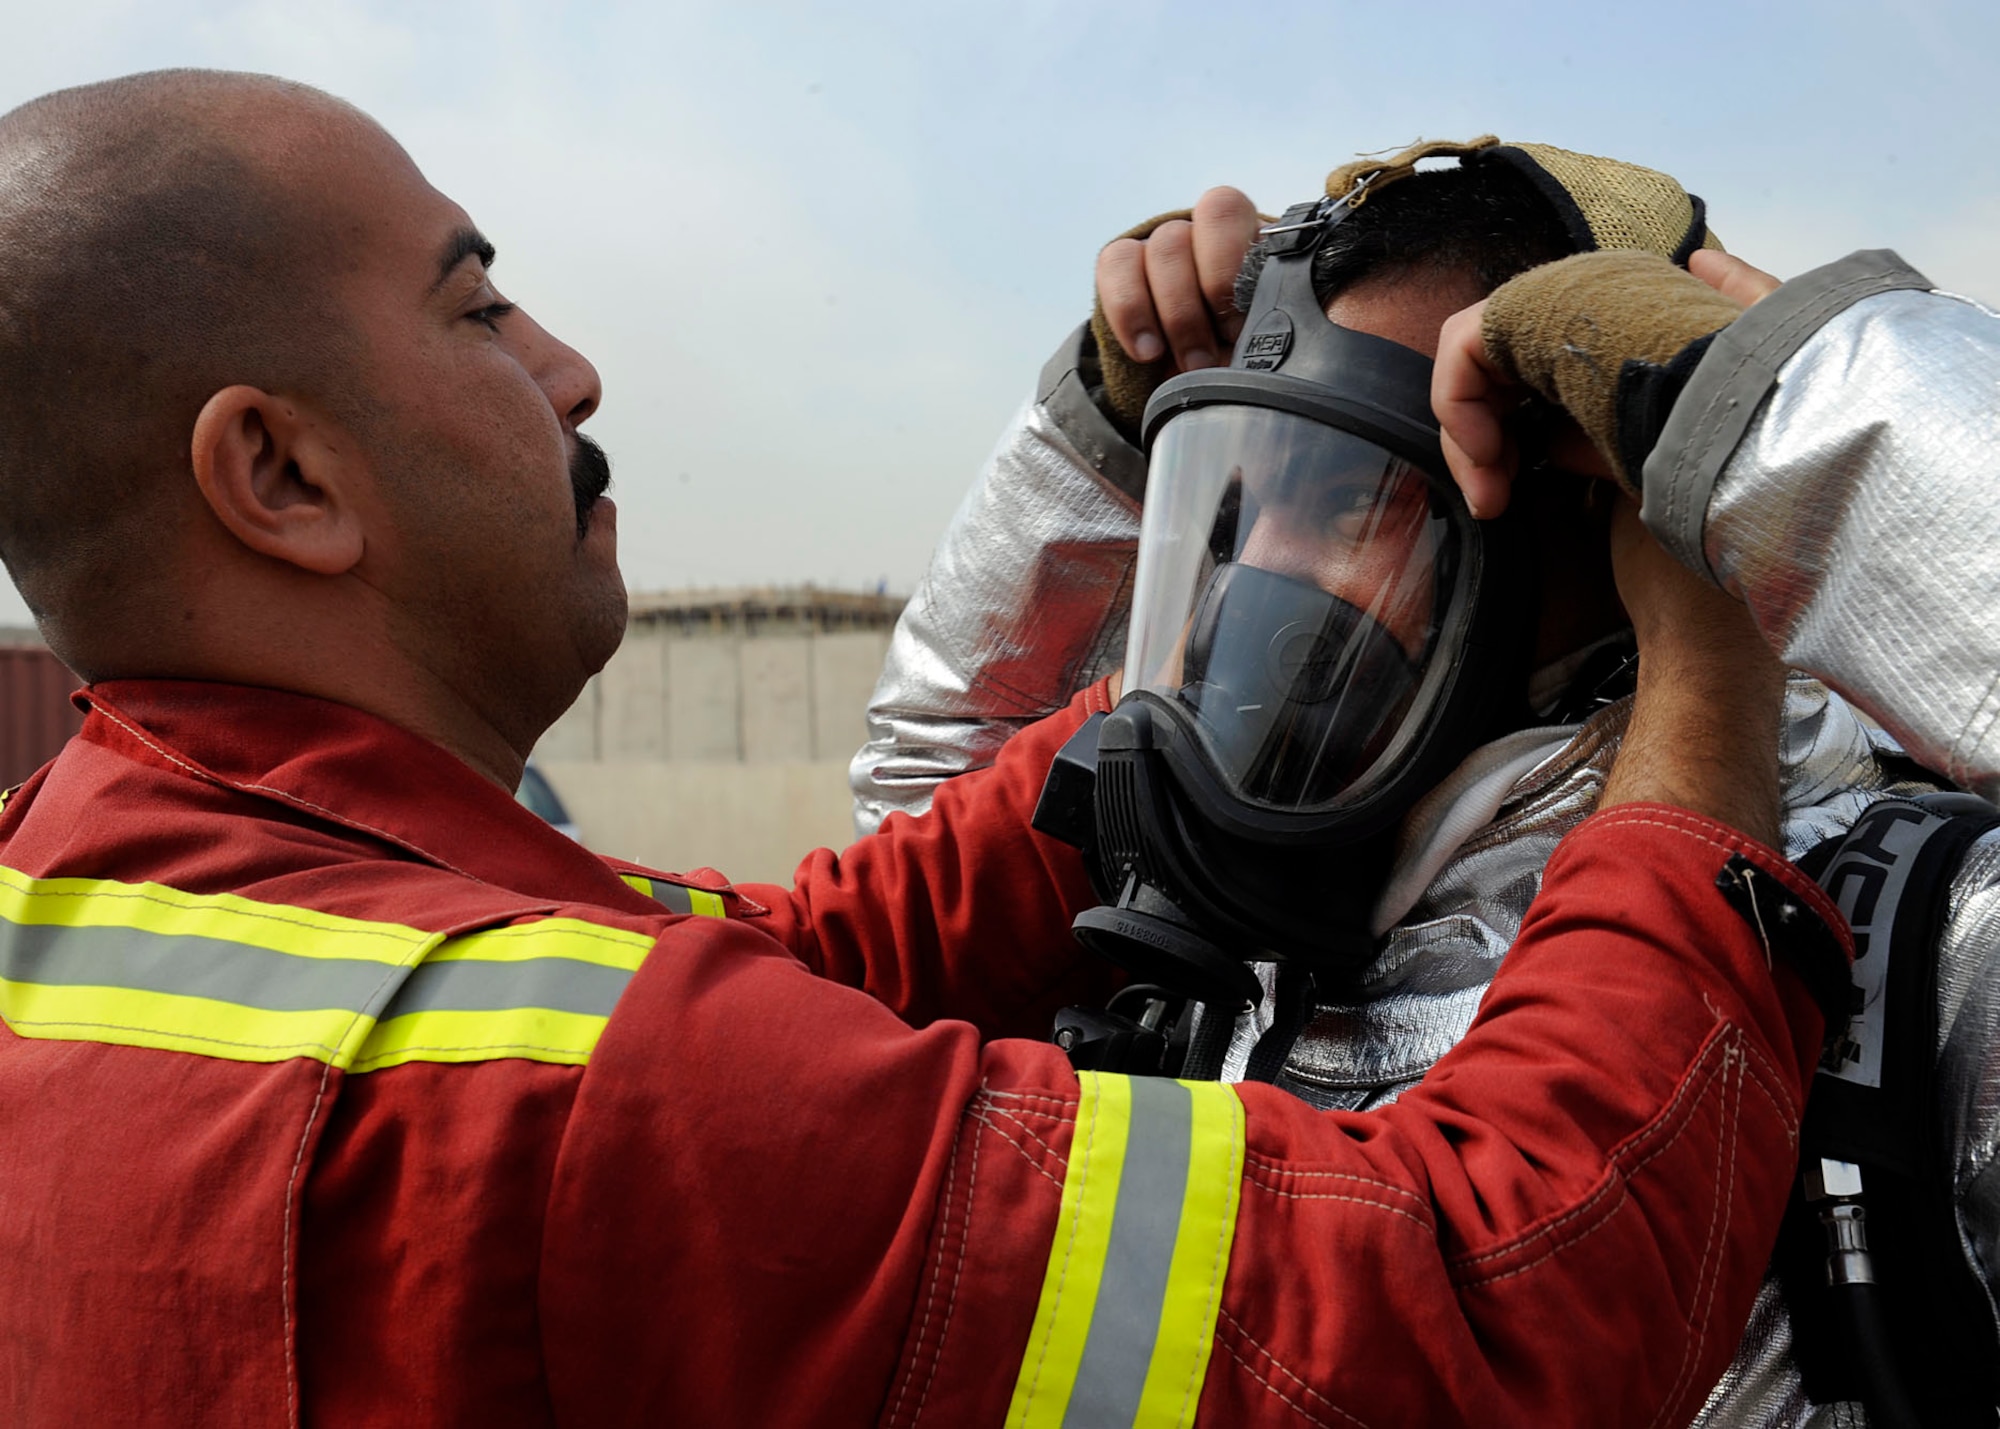 Members of the Iraqi air force and Iraqi civil defense works as a team ensuring their masks are secure. .  The servicemembers are going through the Basic Fire Course at the Iraqi Joint Fire Academy in Baghdad, Iraq April 11, 2009. The trainees prepare to experience a live car burn training exercise, which will ensure they can translate what was learned in the classroom to real live scenarios. This class of 26 students is the largest the academy has pushed through for the two month course.  (U.S. Air Force photo by Senior Airman Jacqueline Romero)